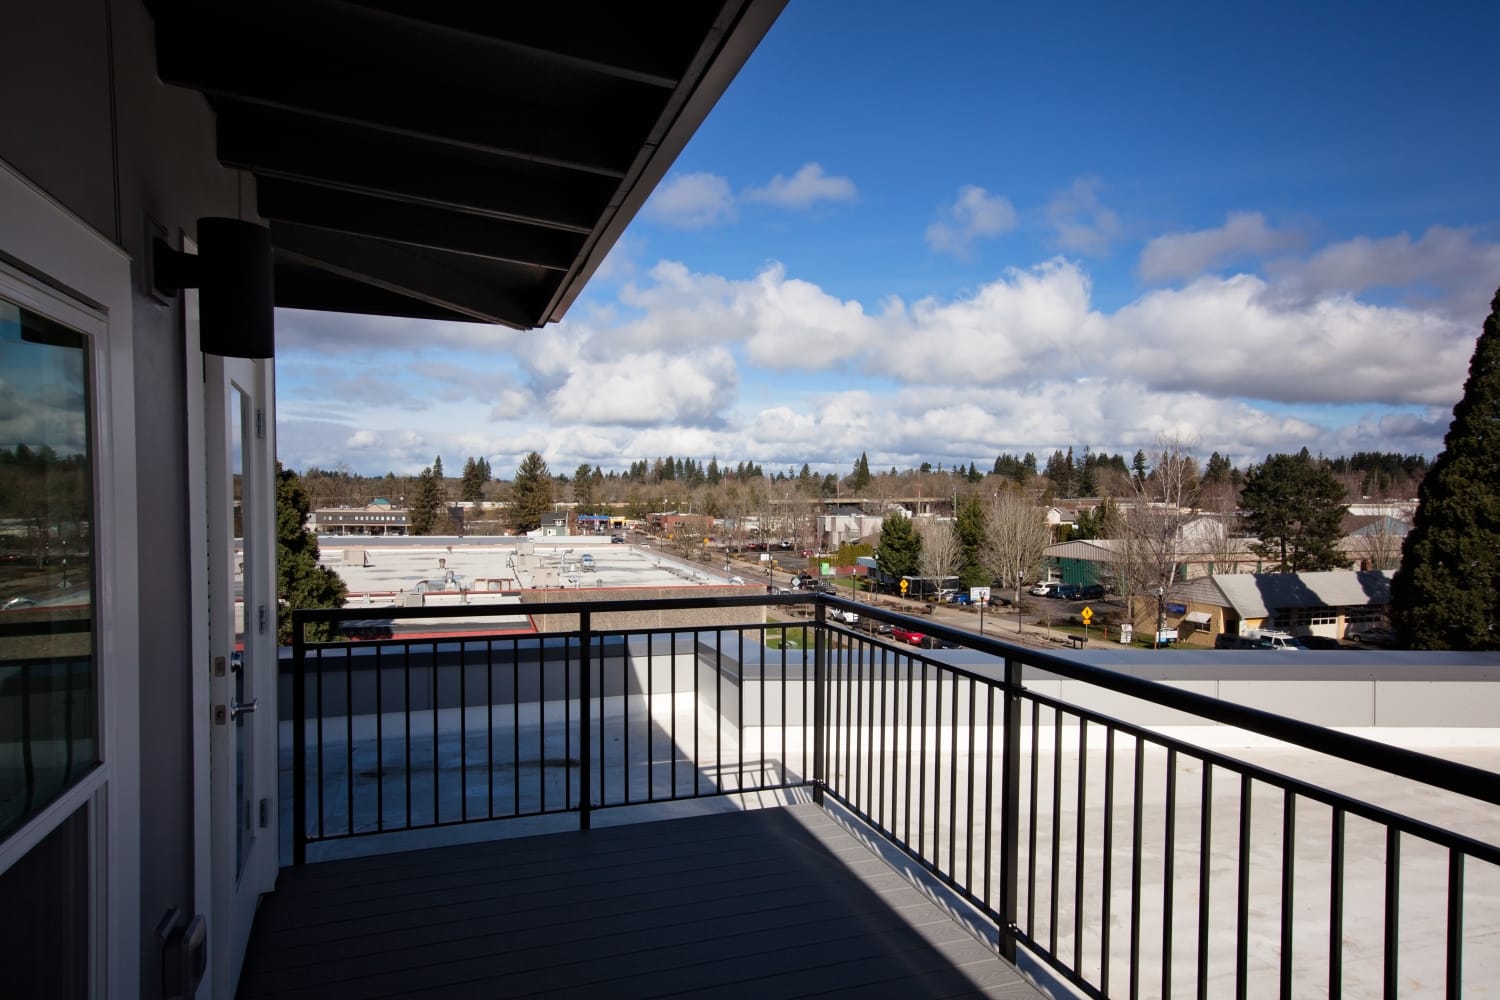 Spacious Balconies and Decks Offer Ample Space to Host Friends